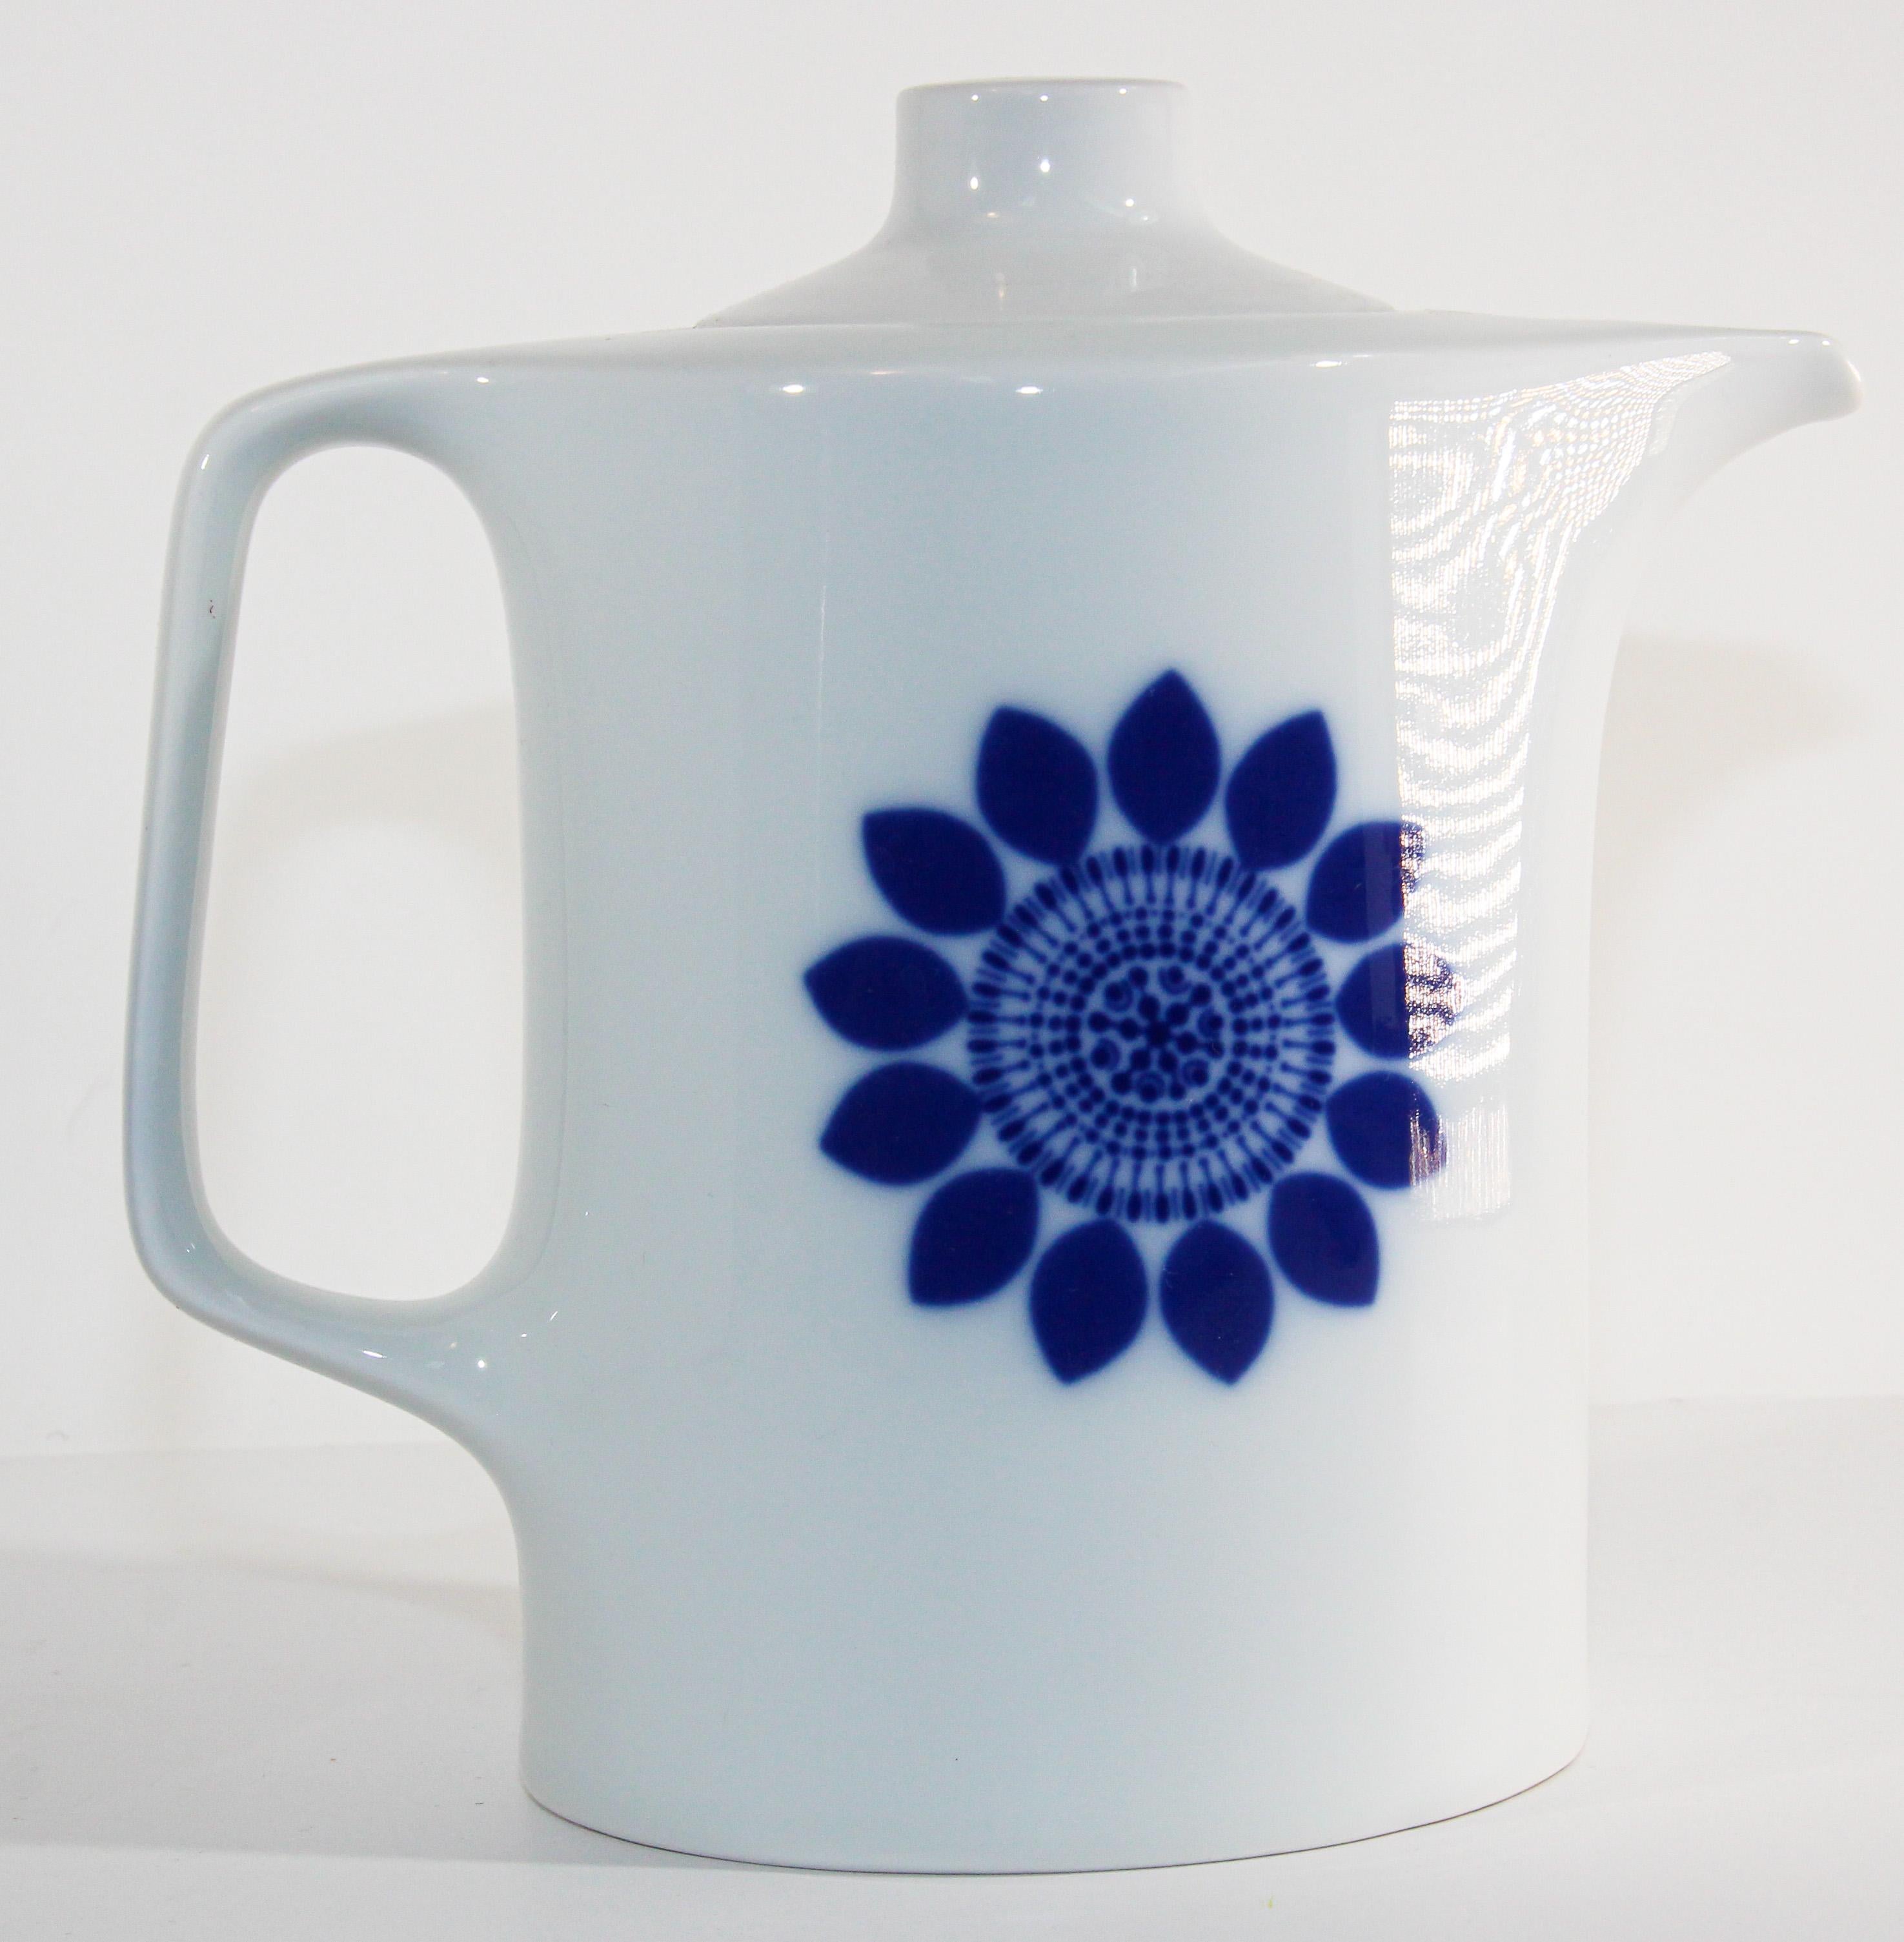 Vintage white porcelain teapot with lid and a cobalt blue stylised flower burst design on each side. 
Minimalist porcelain coffee pot or tea pot
Made in Germany, released between 1968 and 1970, by the famous designer HEINZ ENGLER.
Marked: Germany